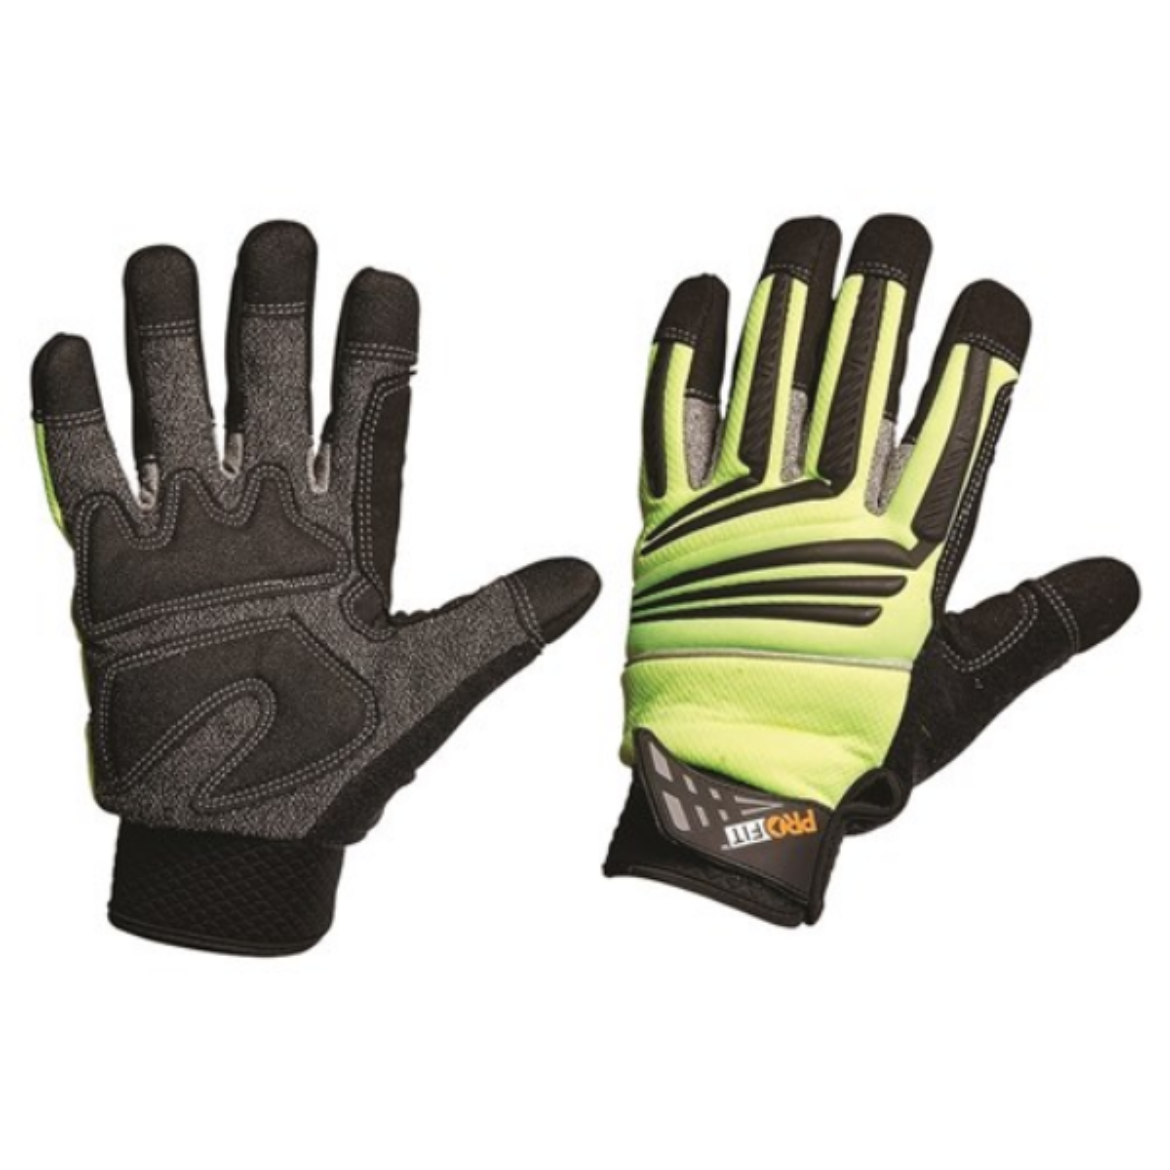 Picture of PRO-FIT GRIP HI-VIS YELLOW FULL FINGER, REINFORCED PALM. ** MUST ORDER IN MULTIPLES OF 6